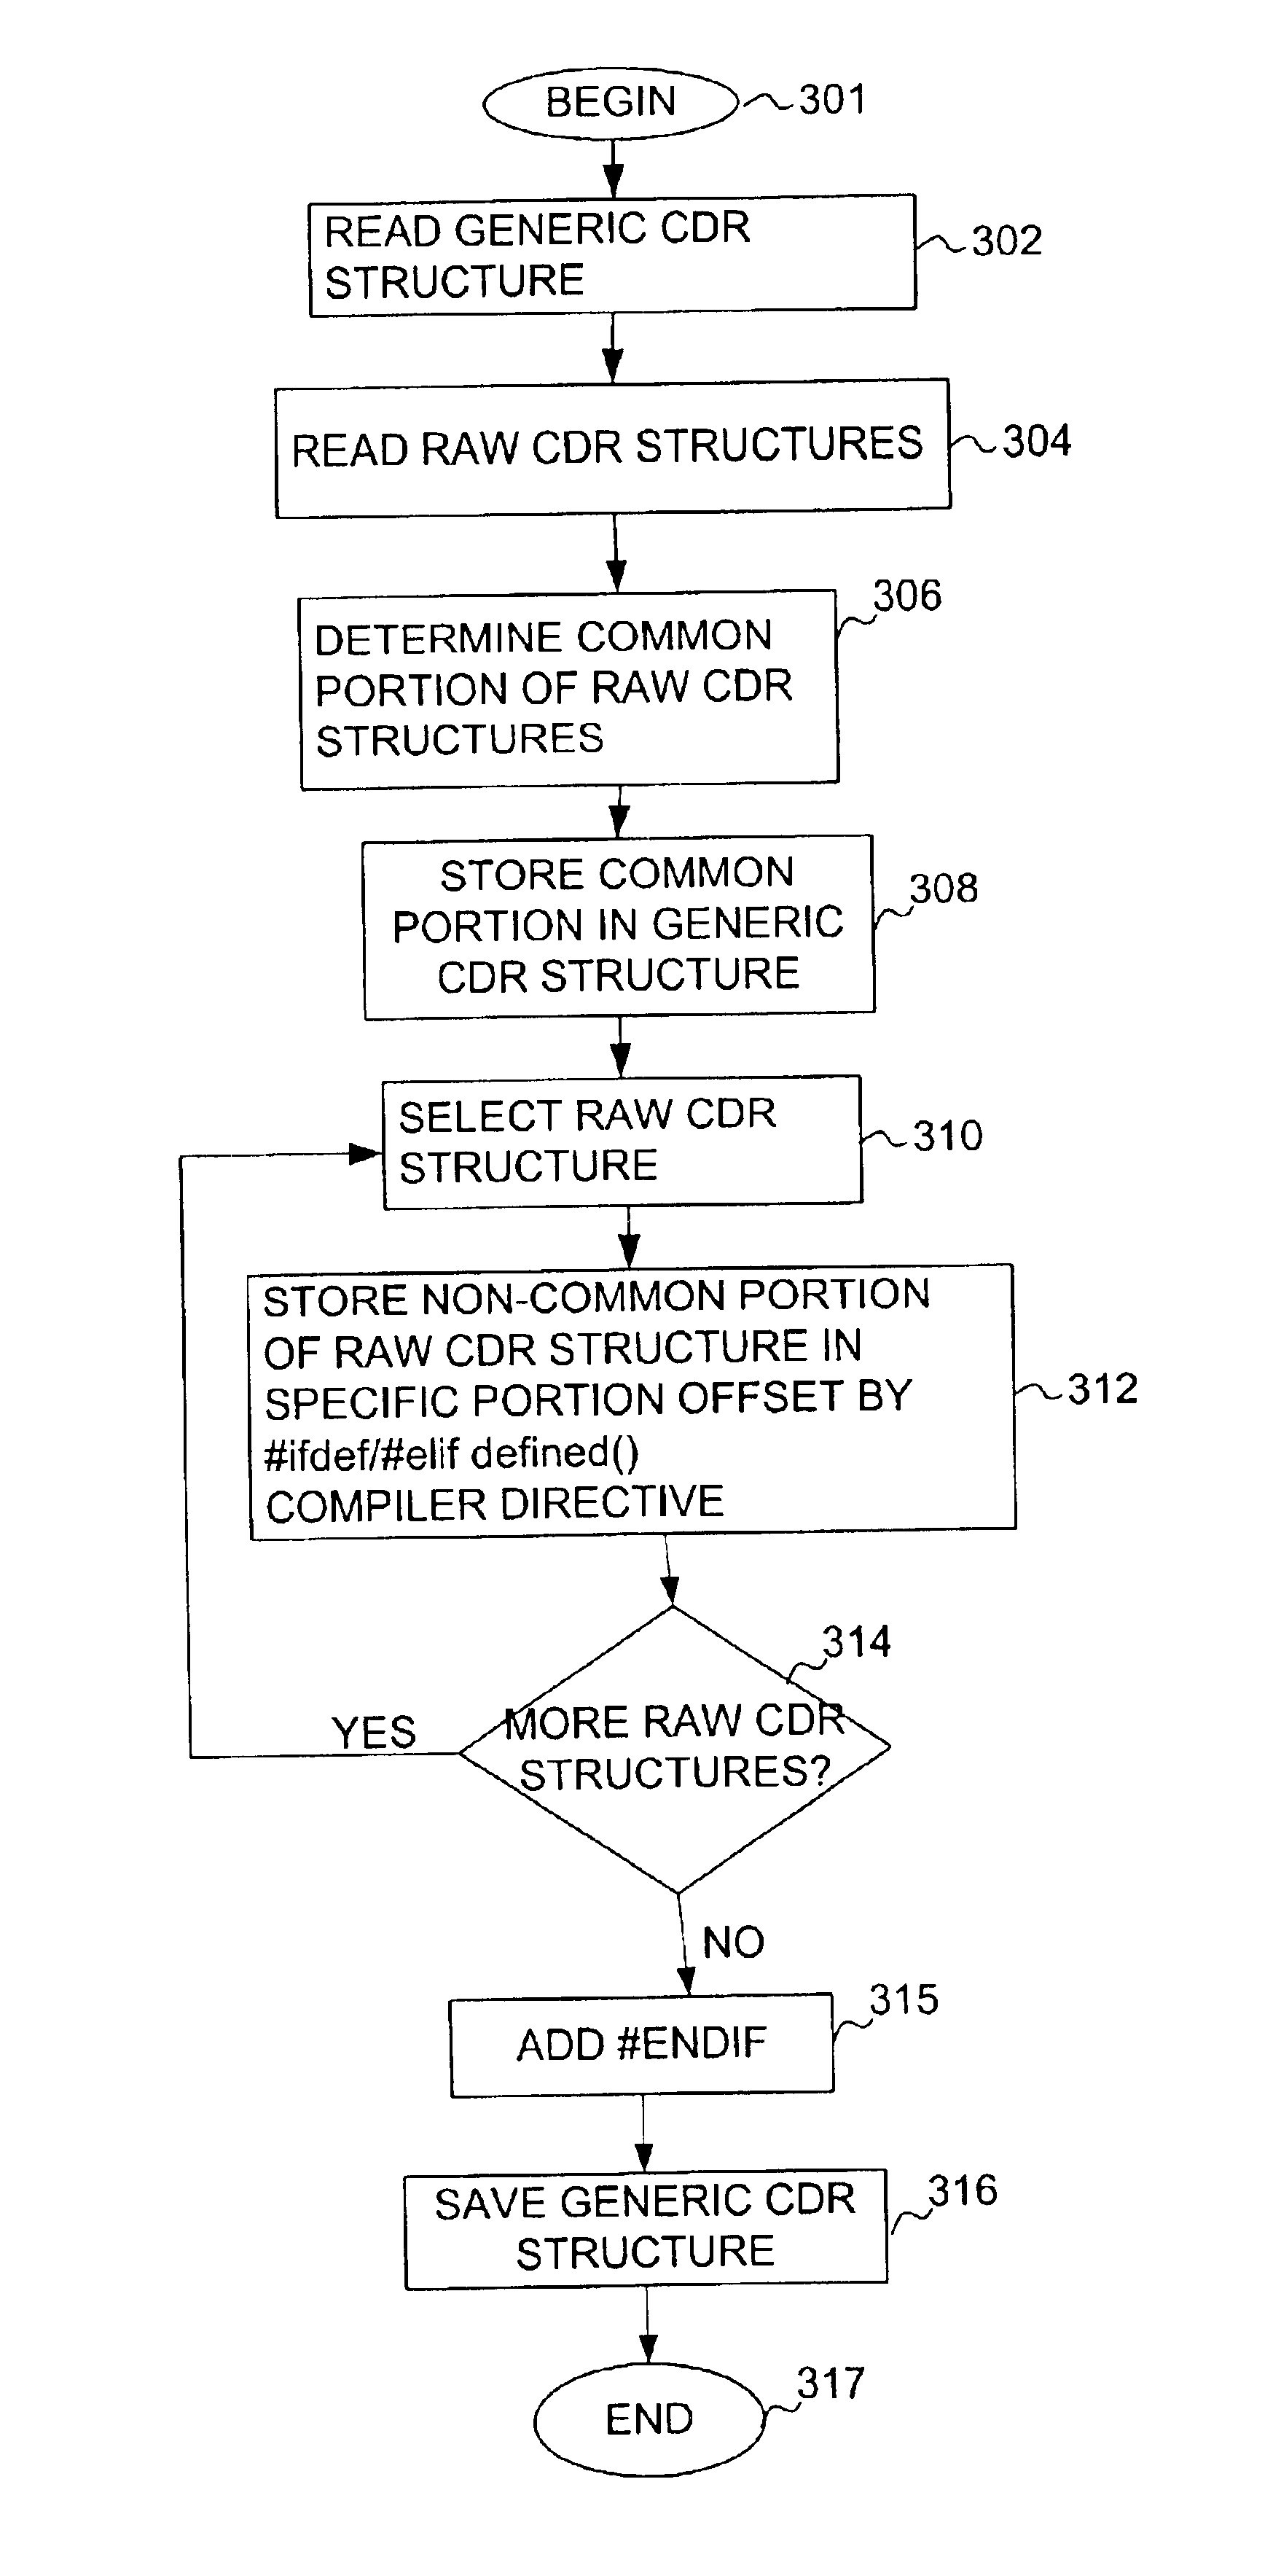 System and method for generating computer code to facilitate development of CDR management tools